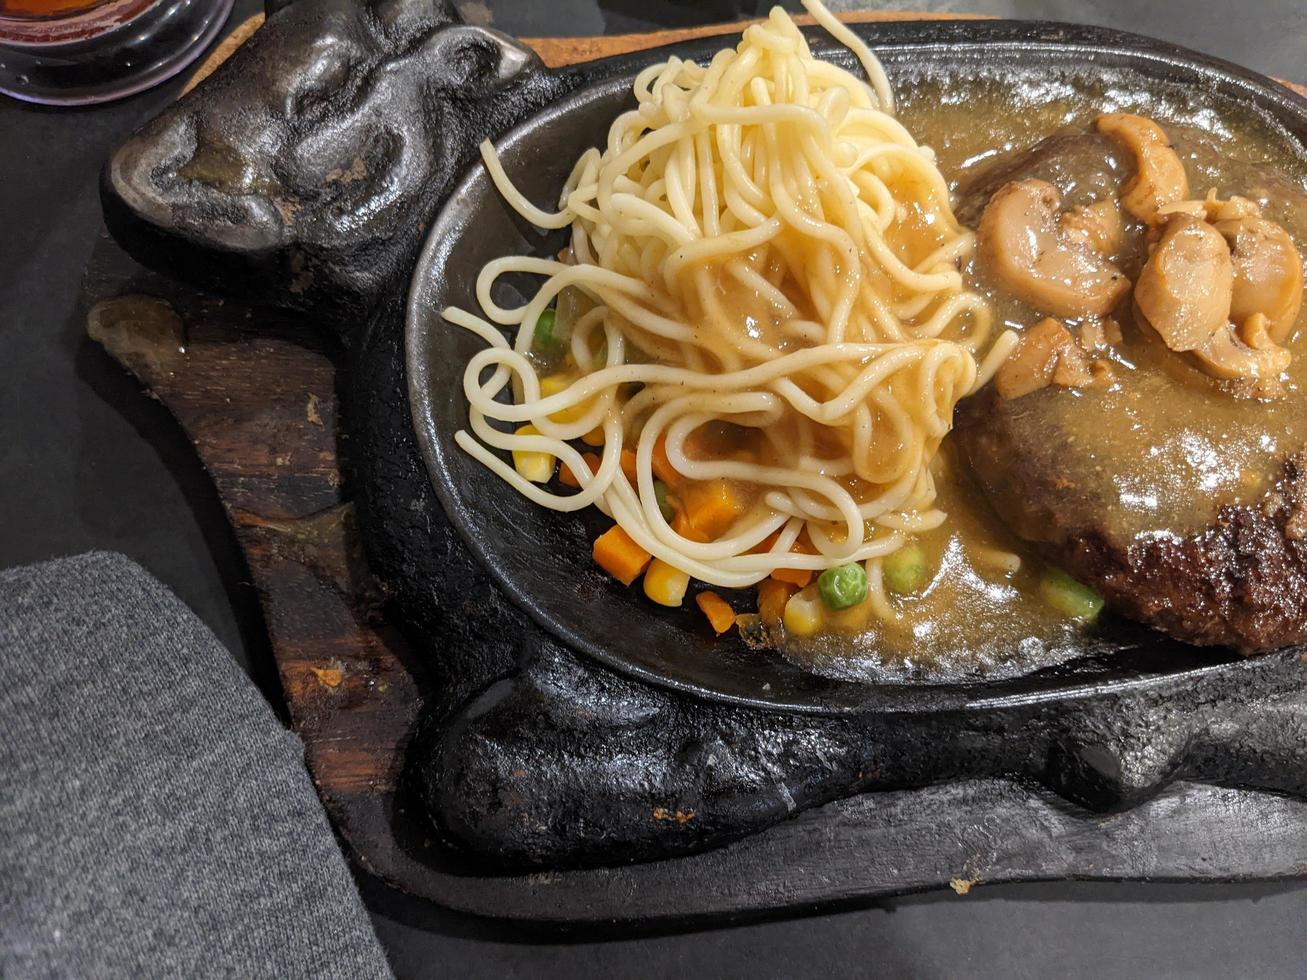 Extra beef steak with noodles and mushroom sauce. The photo is suitable to use for food background, poster and food content media.